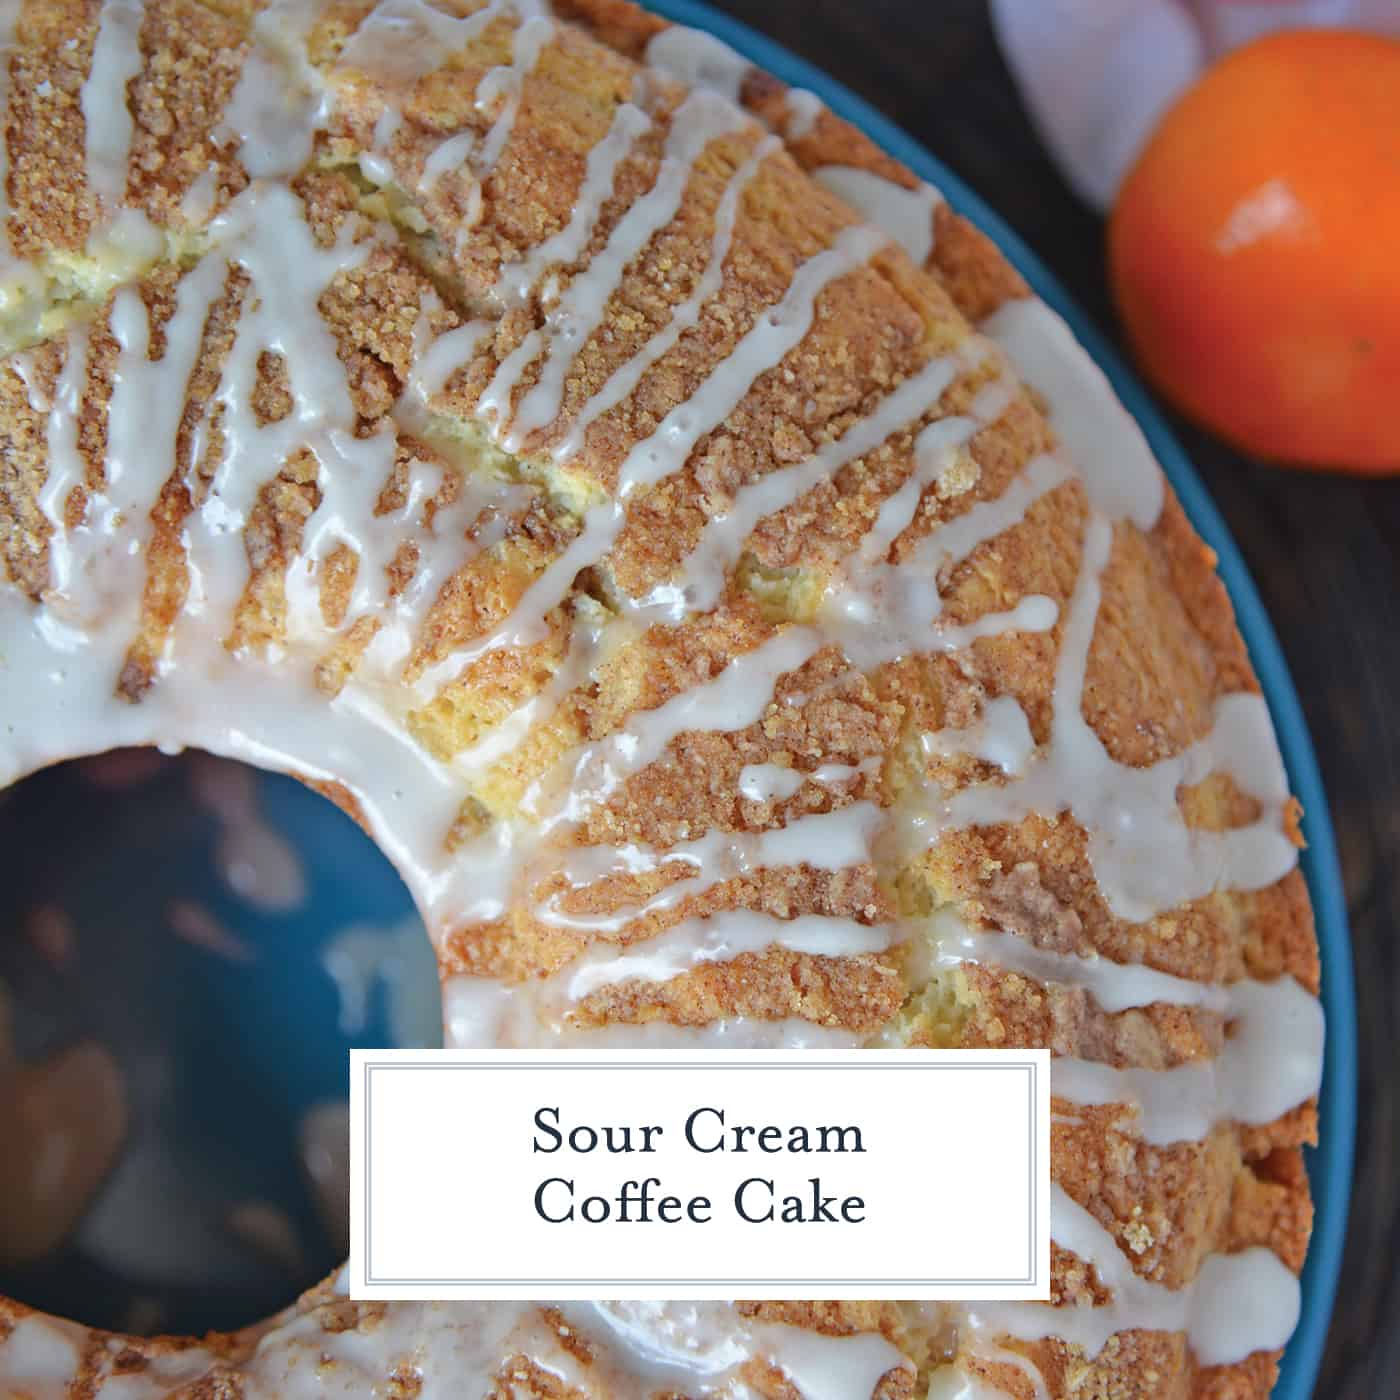 Sour Cream Coffee Cake is an easy coffee cake recipe with a streusel ribbon and crumb topping. Super moist without being overly sweet. Perfect for brunch or dessert. #sourcreamcoffeecake #easycoffeecakerecipe www.savoryexperiments.com 